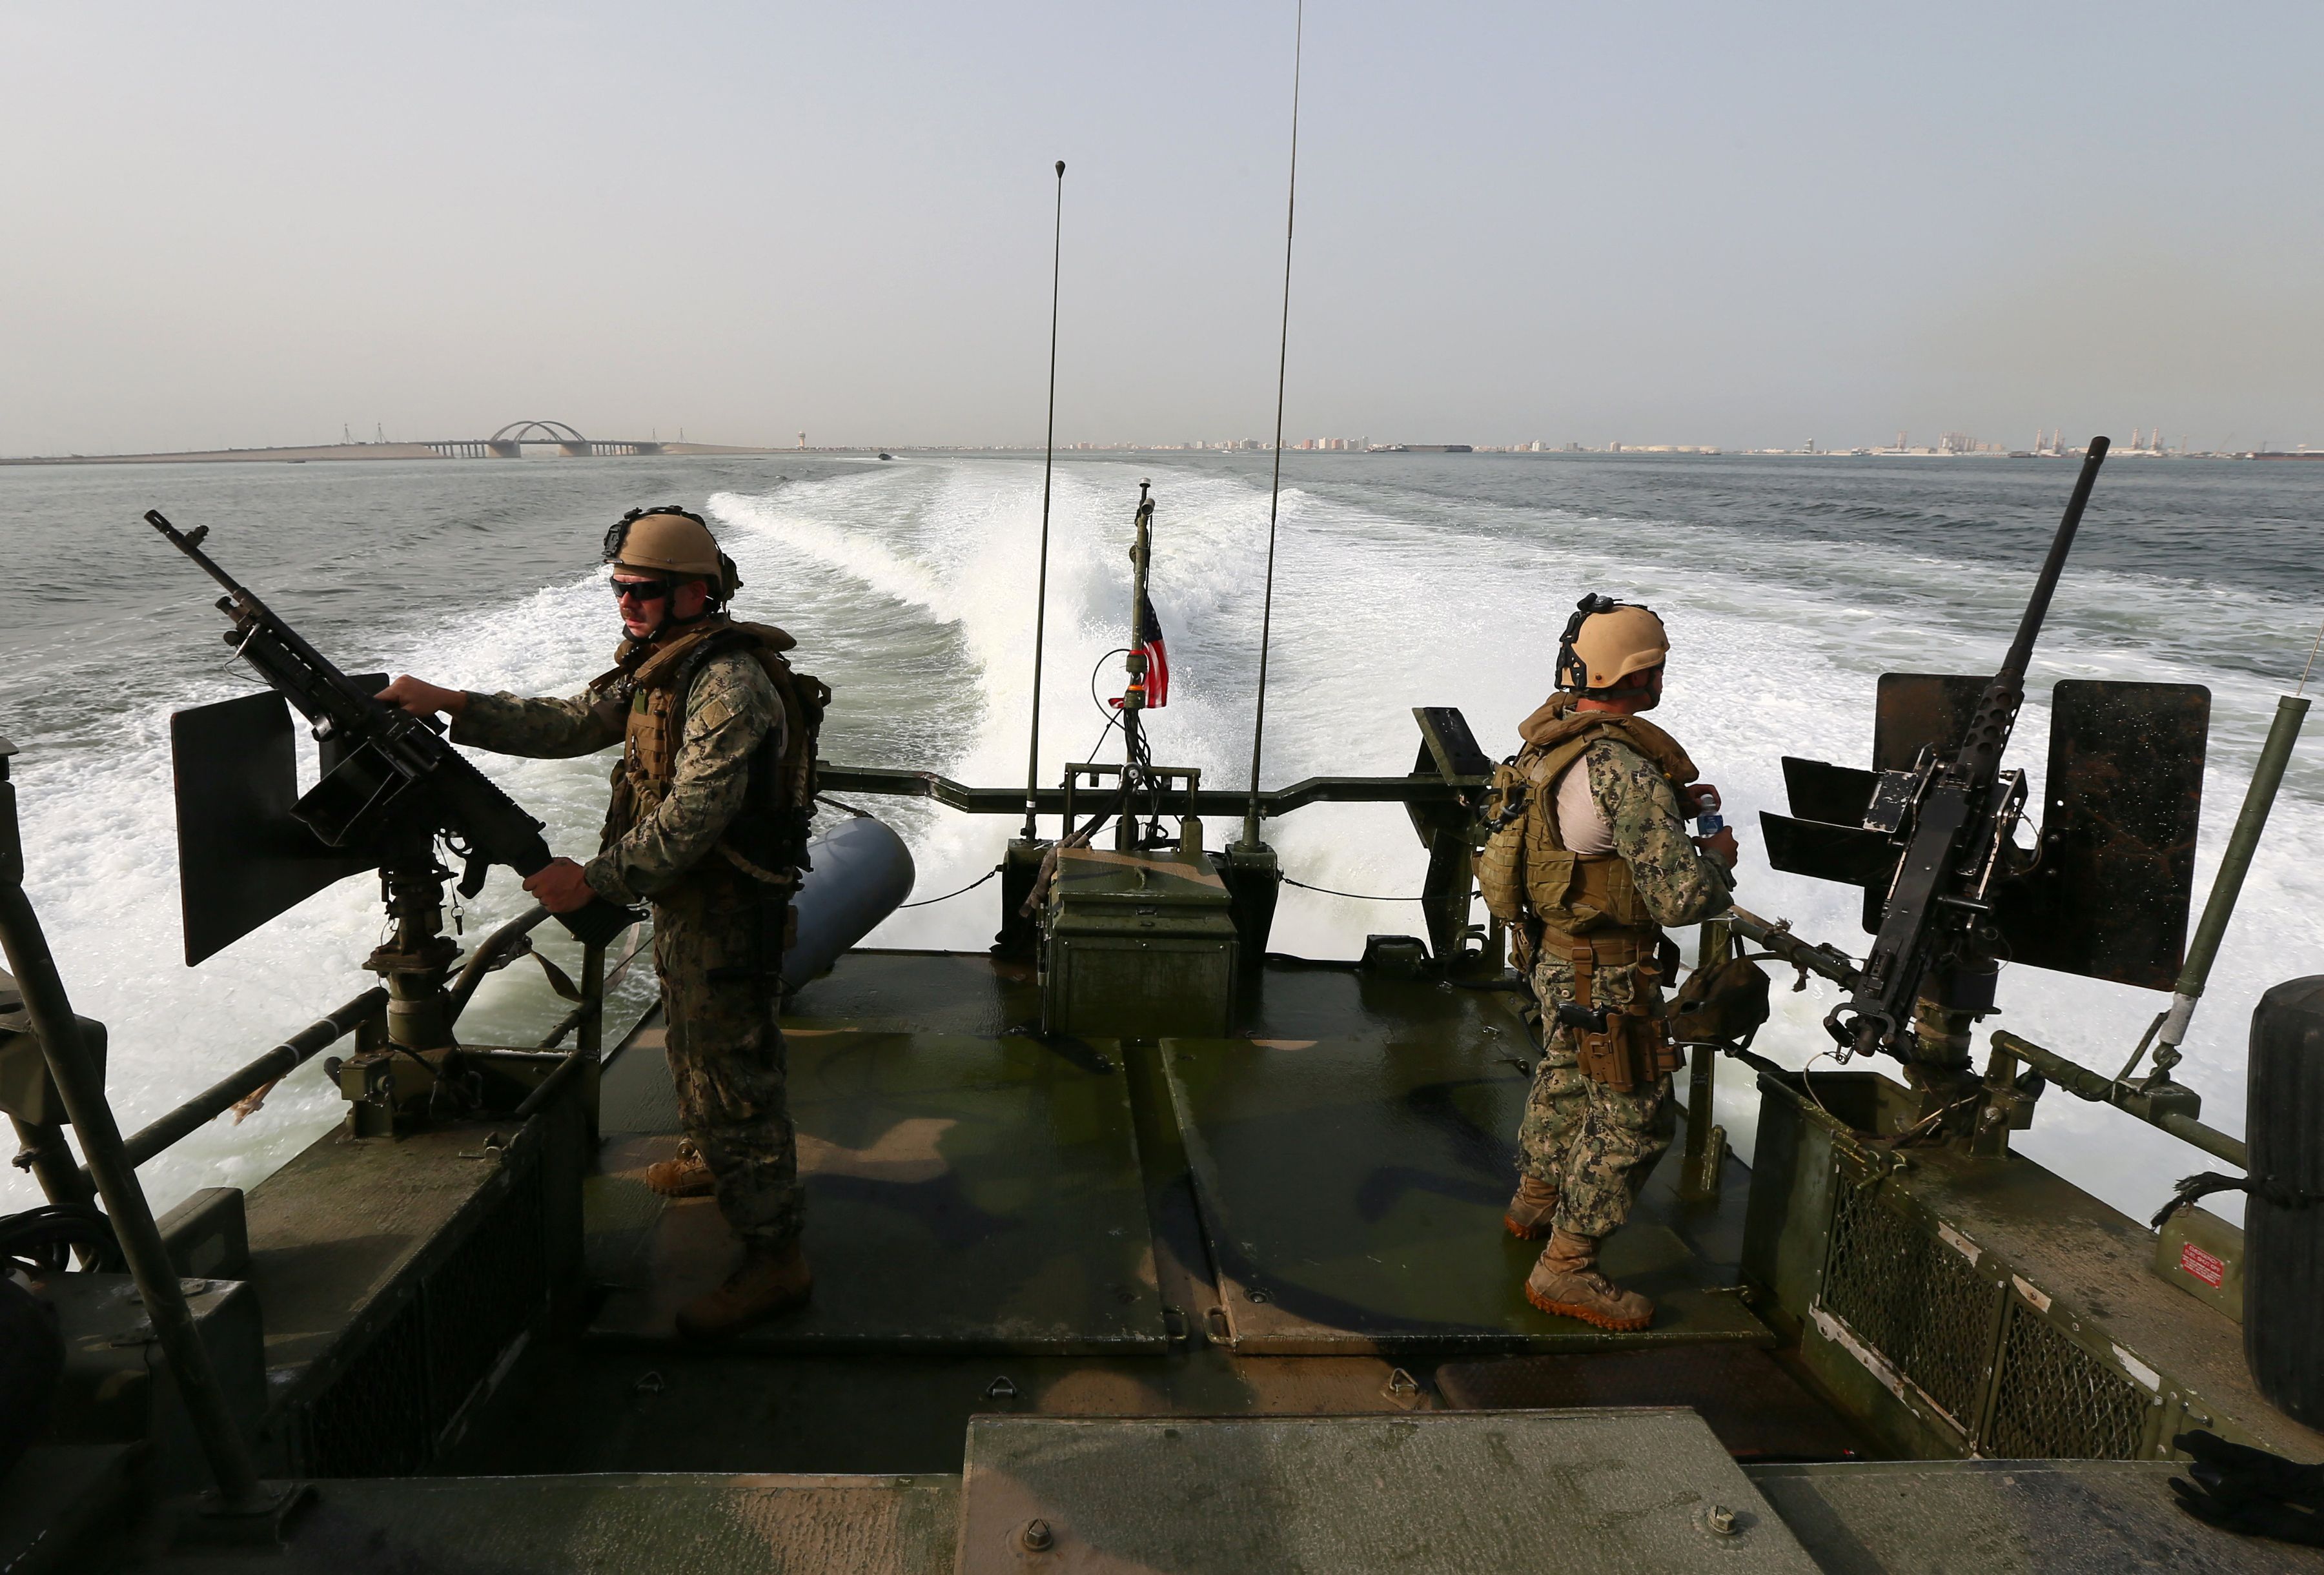 U.S Navy personnel aboard a boat off the coast of Bahrain's Salman port in May 2013.